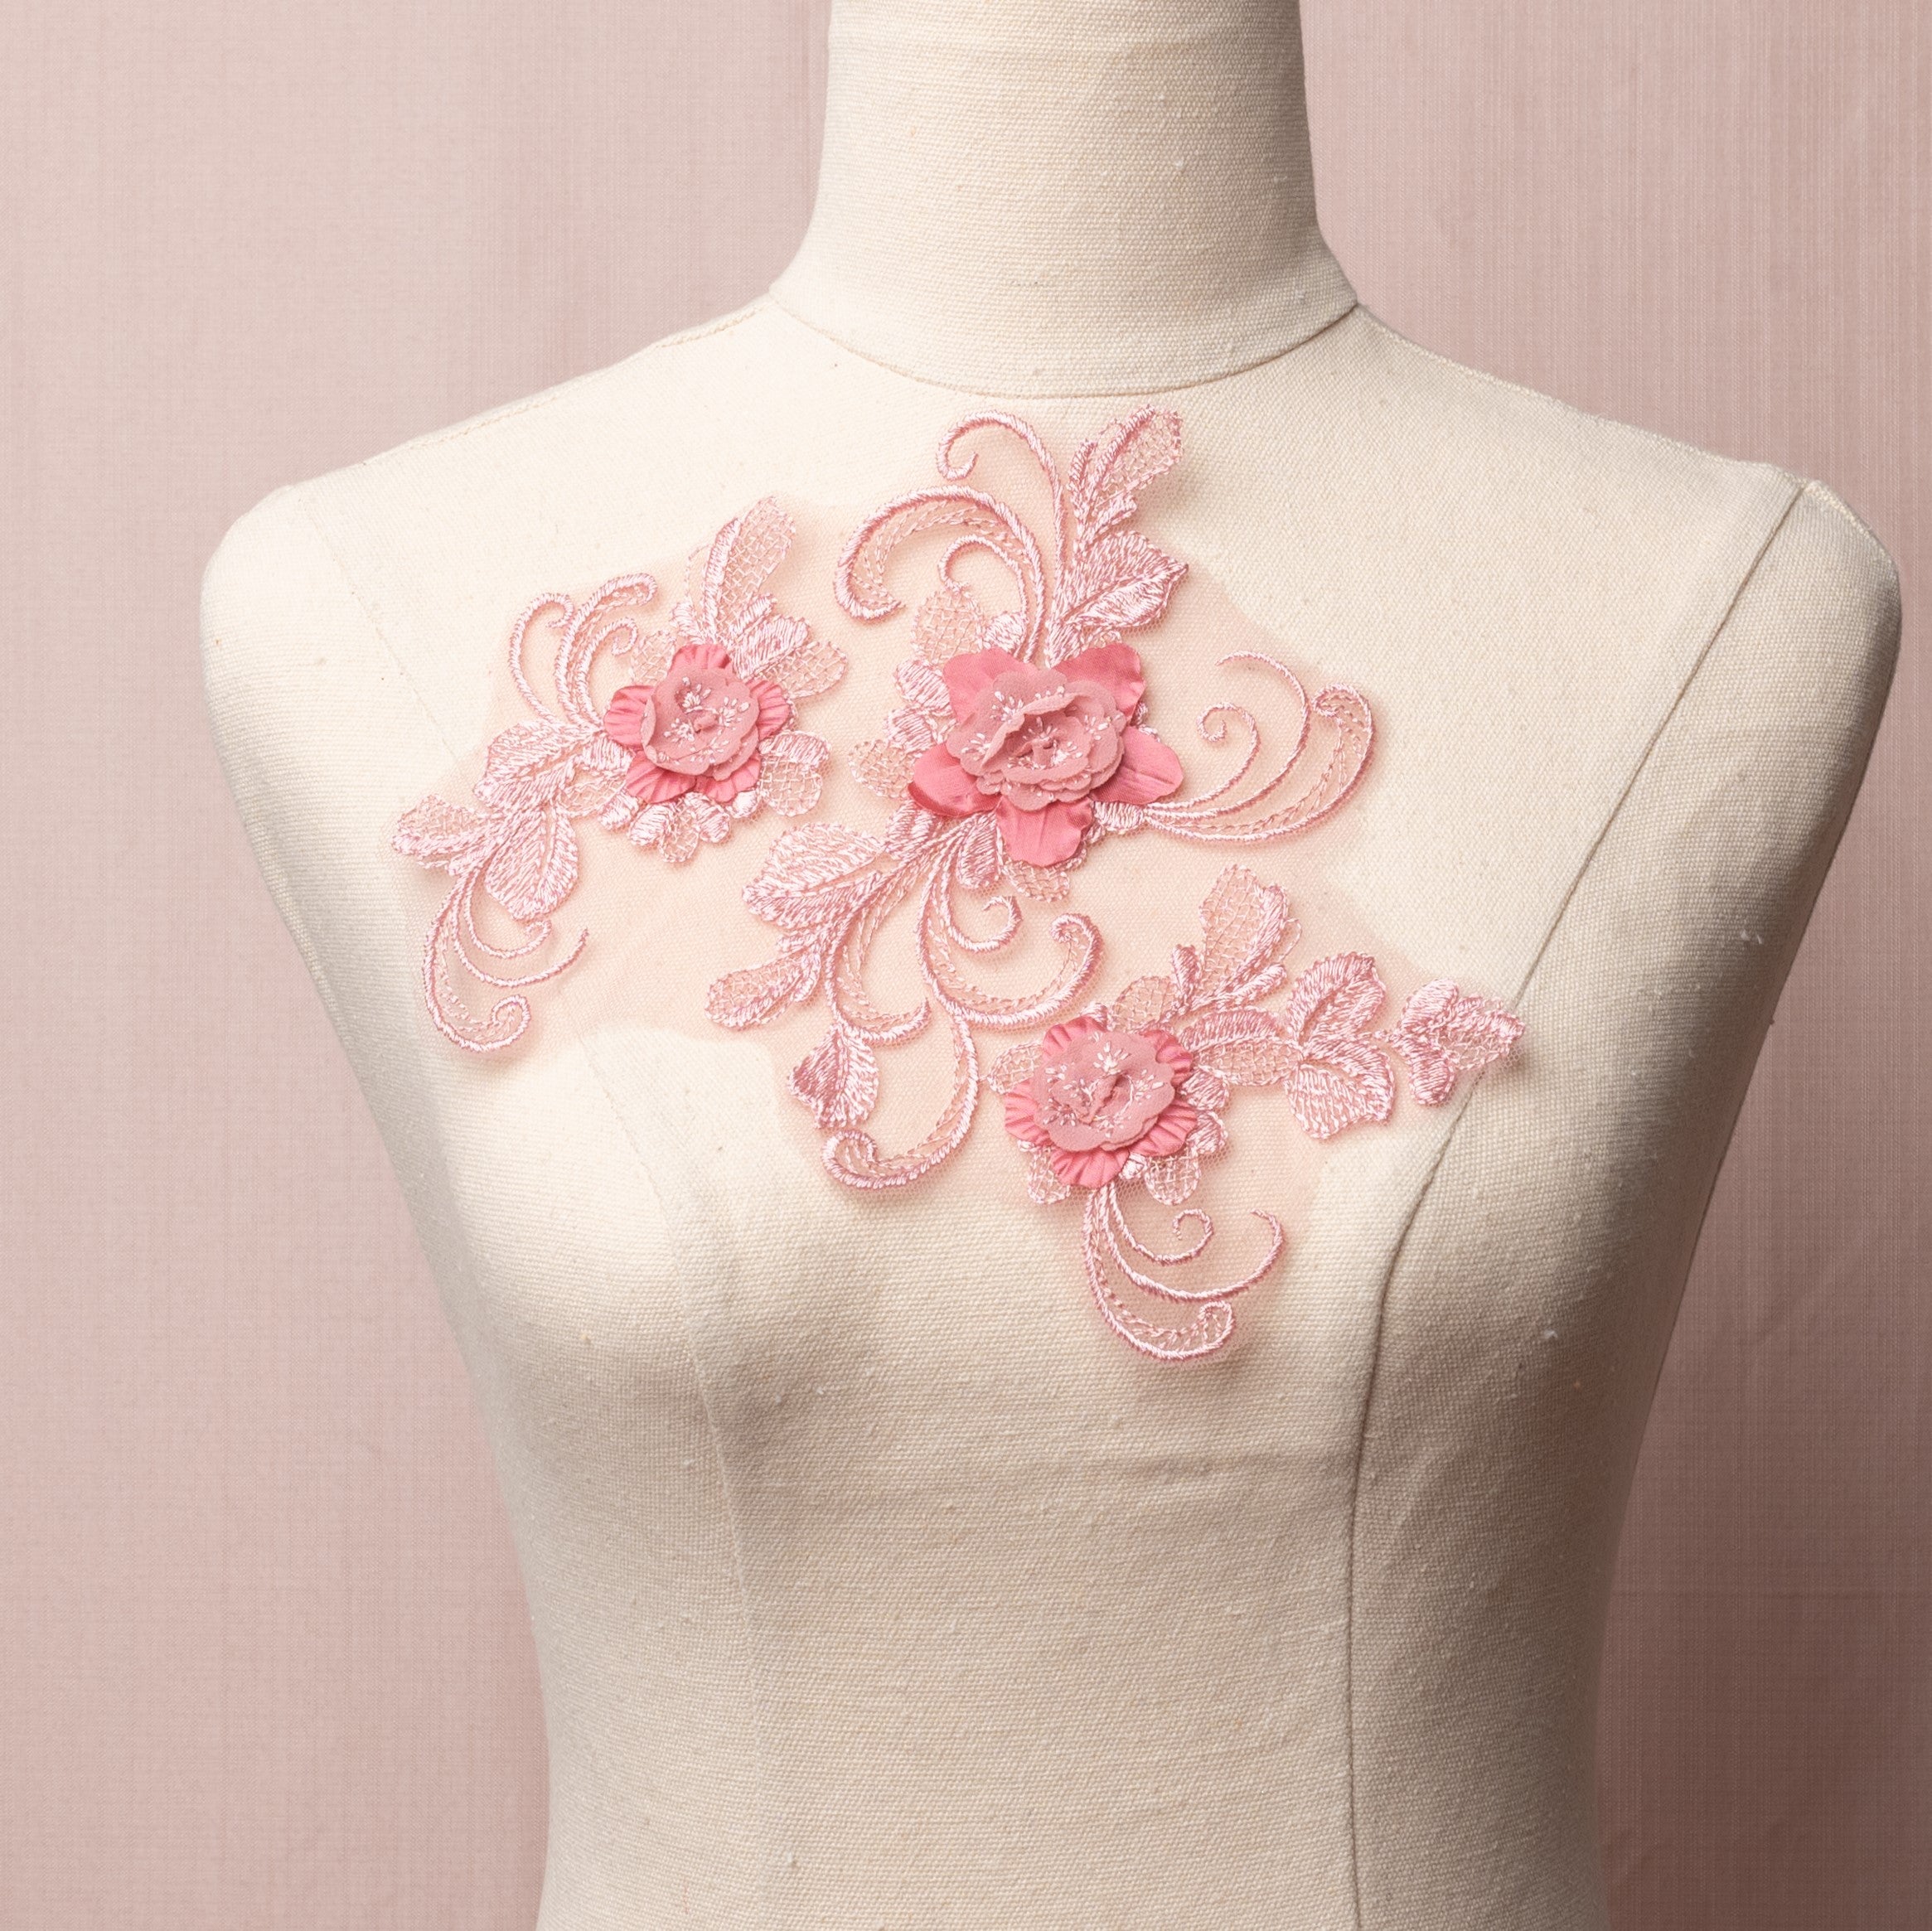 An openwork embroidered dusty pink single applique in a floral design with swirling stems, 3D flowers and crosshatched leaves displayed on a mannequin.